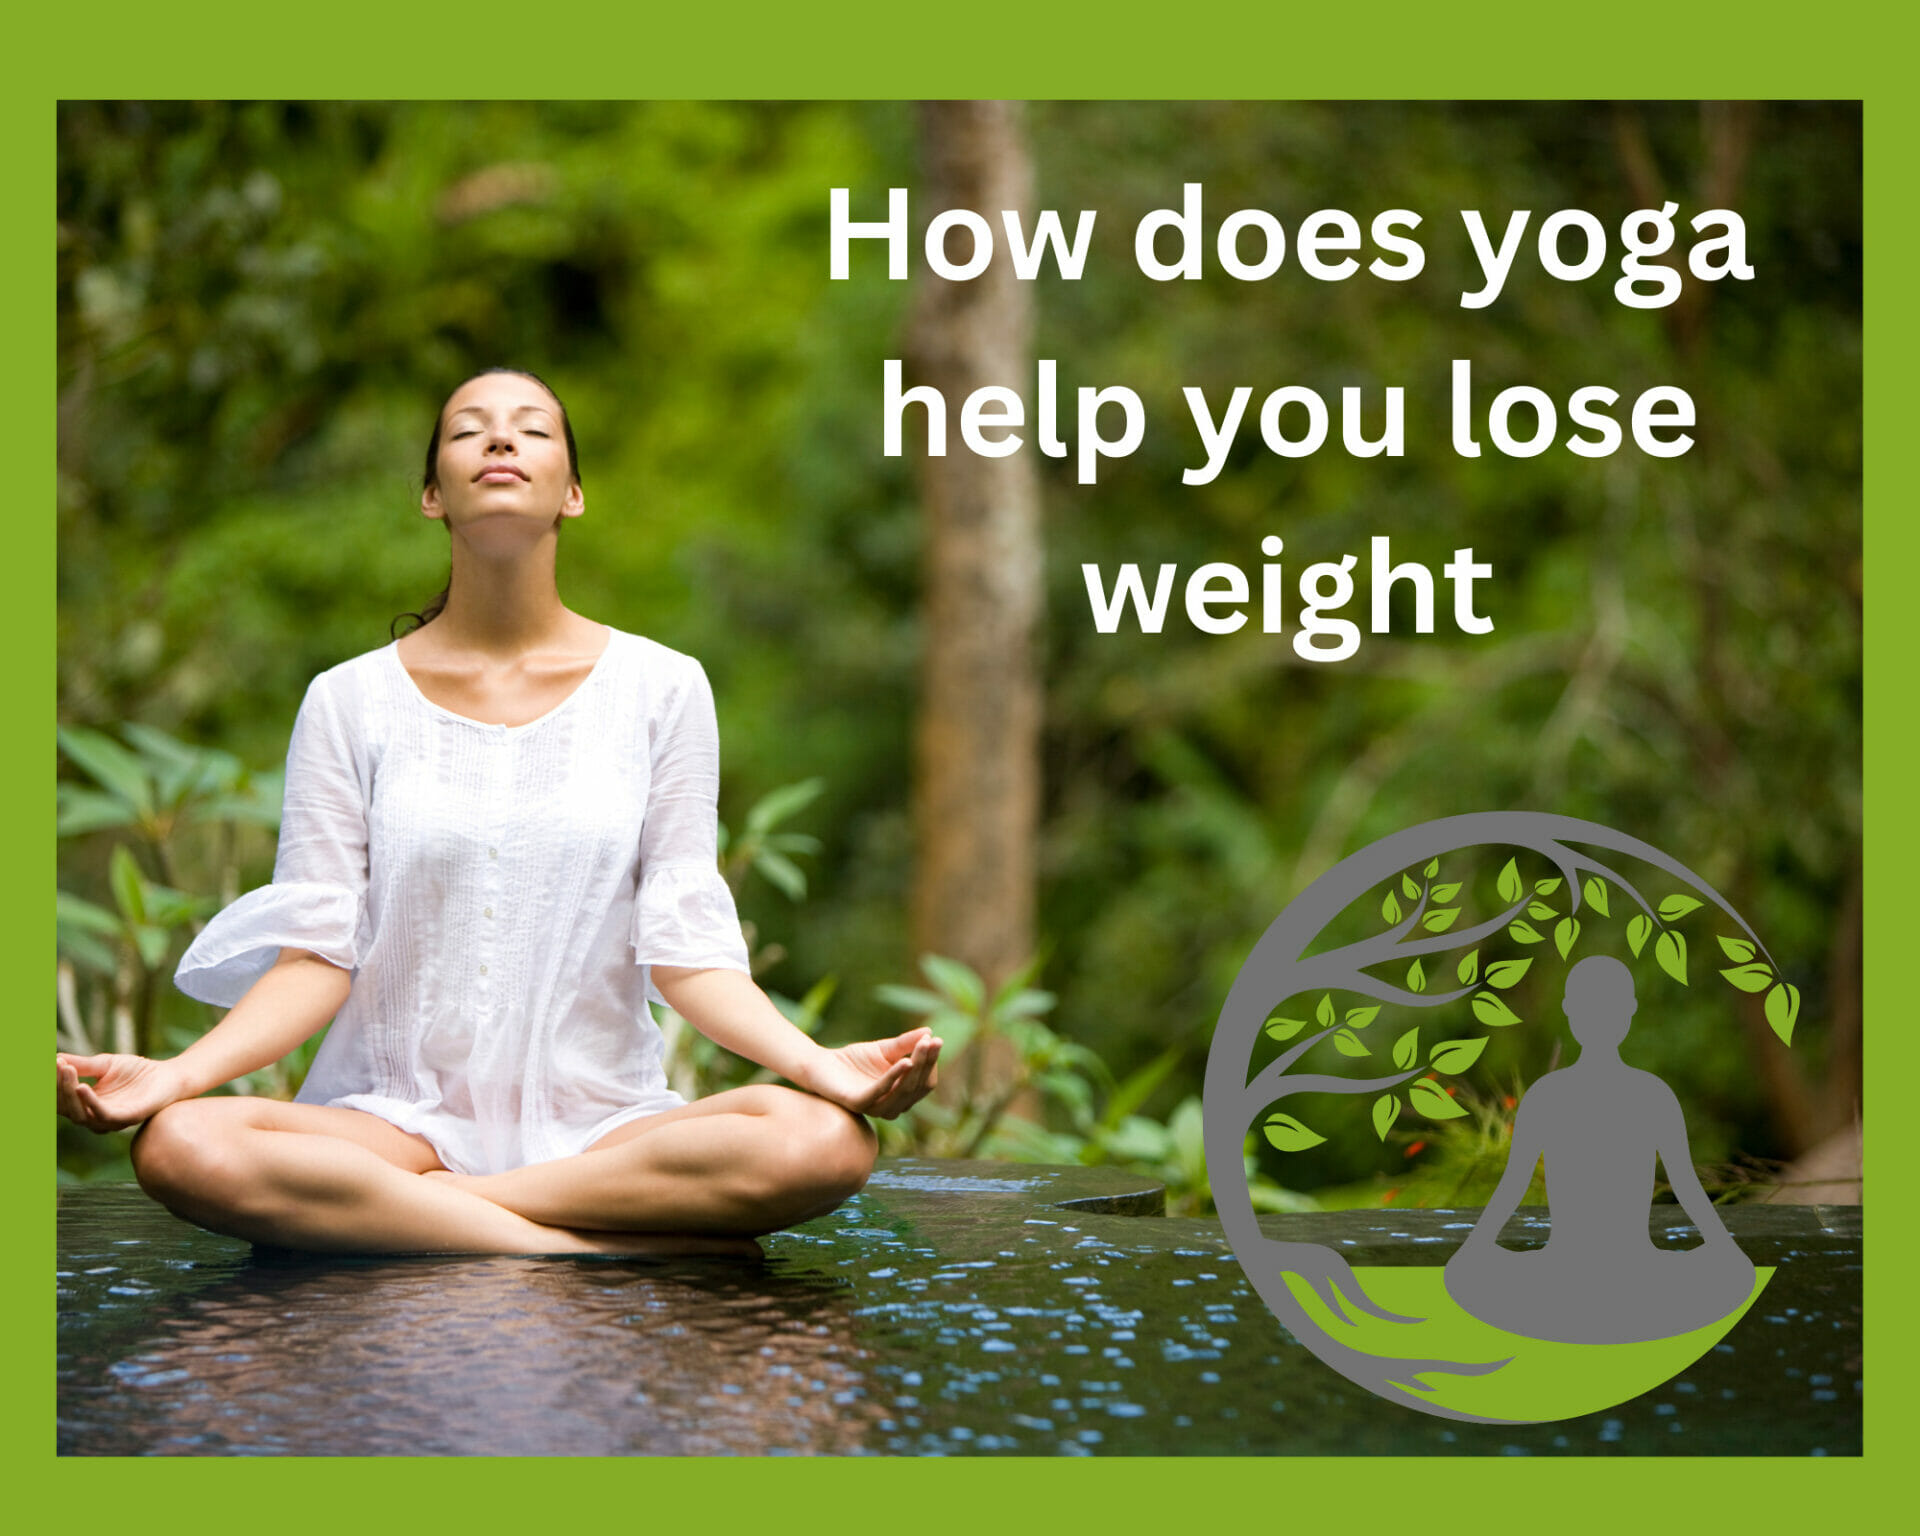 How does yoga help you lose weight